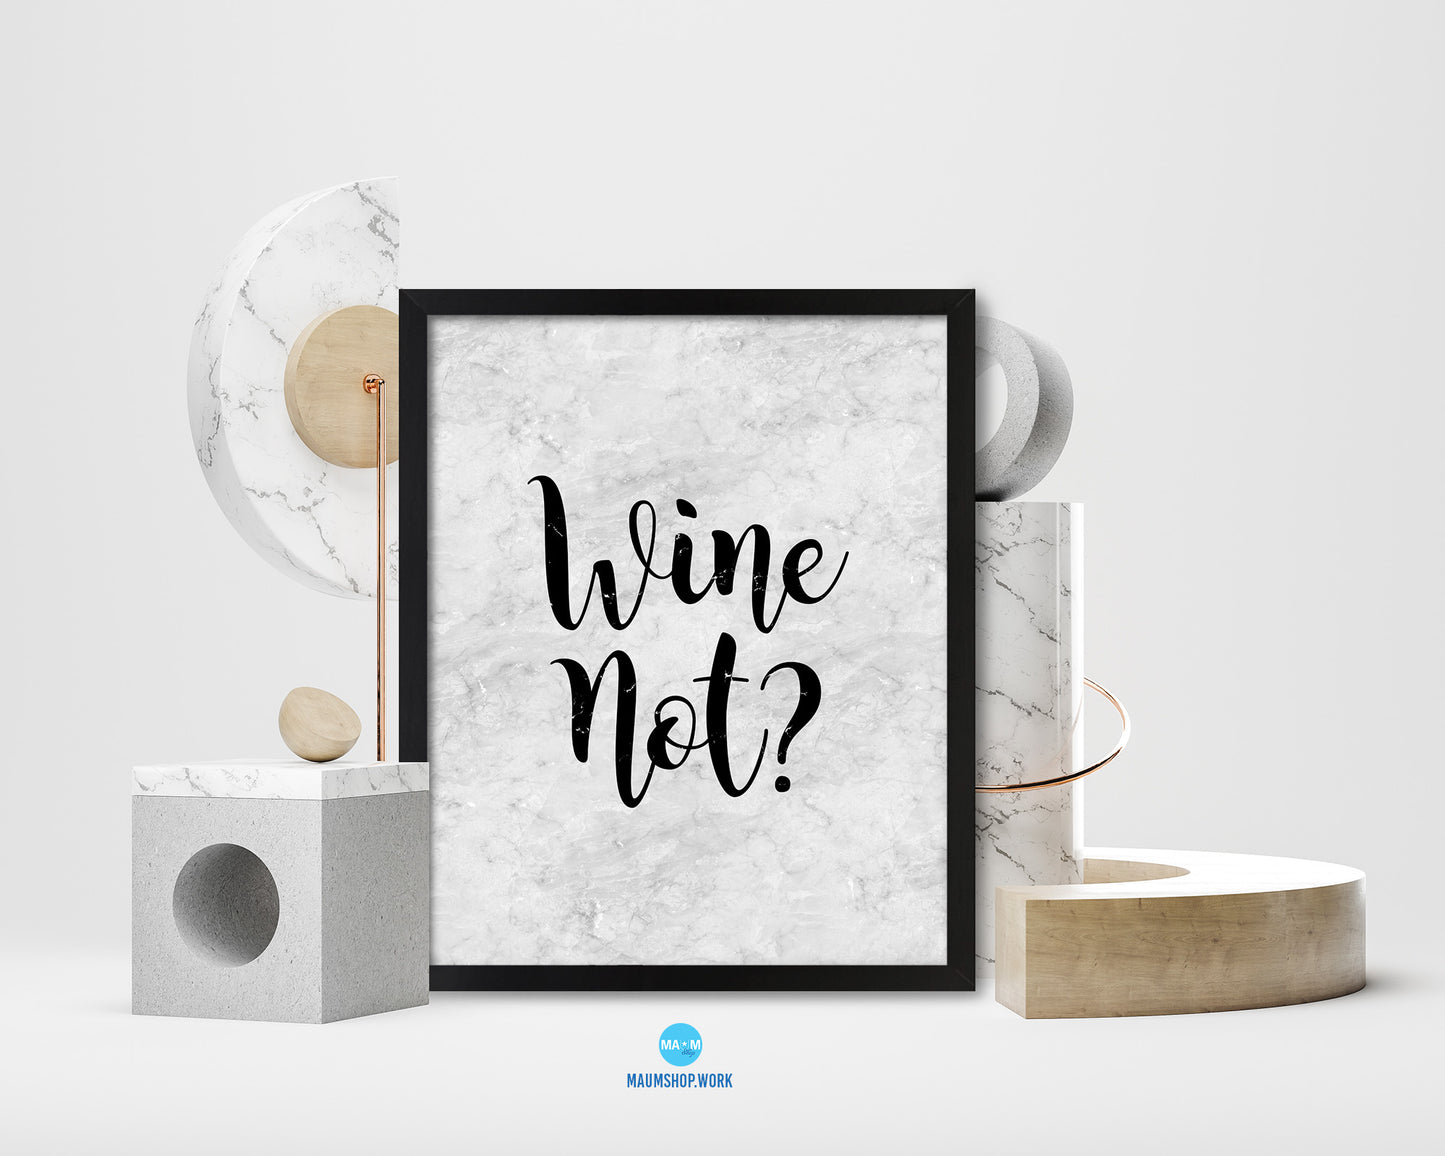 Wine Not Quote Framed Print Wall Art Decor Gifts